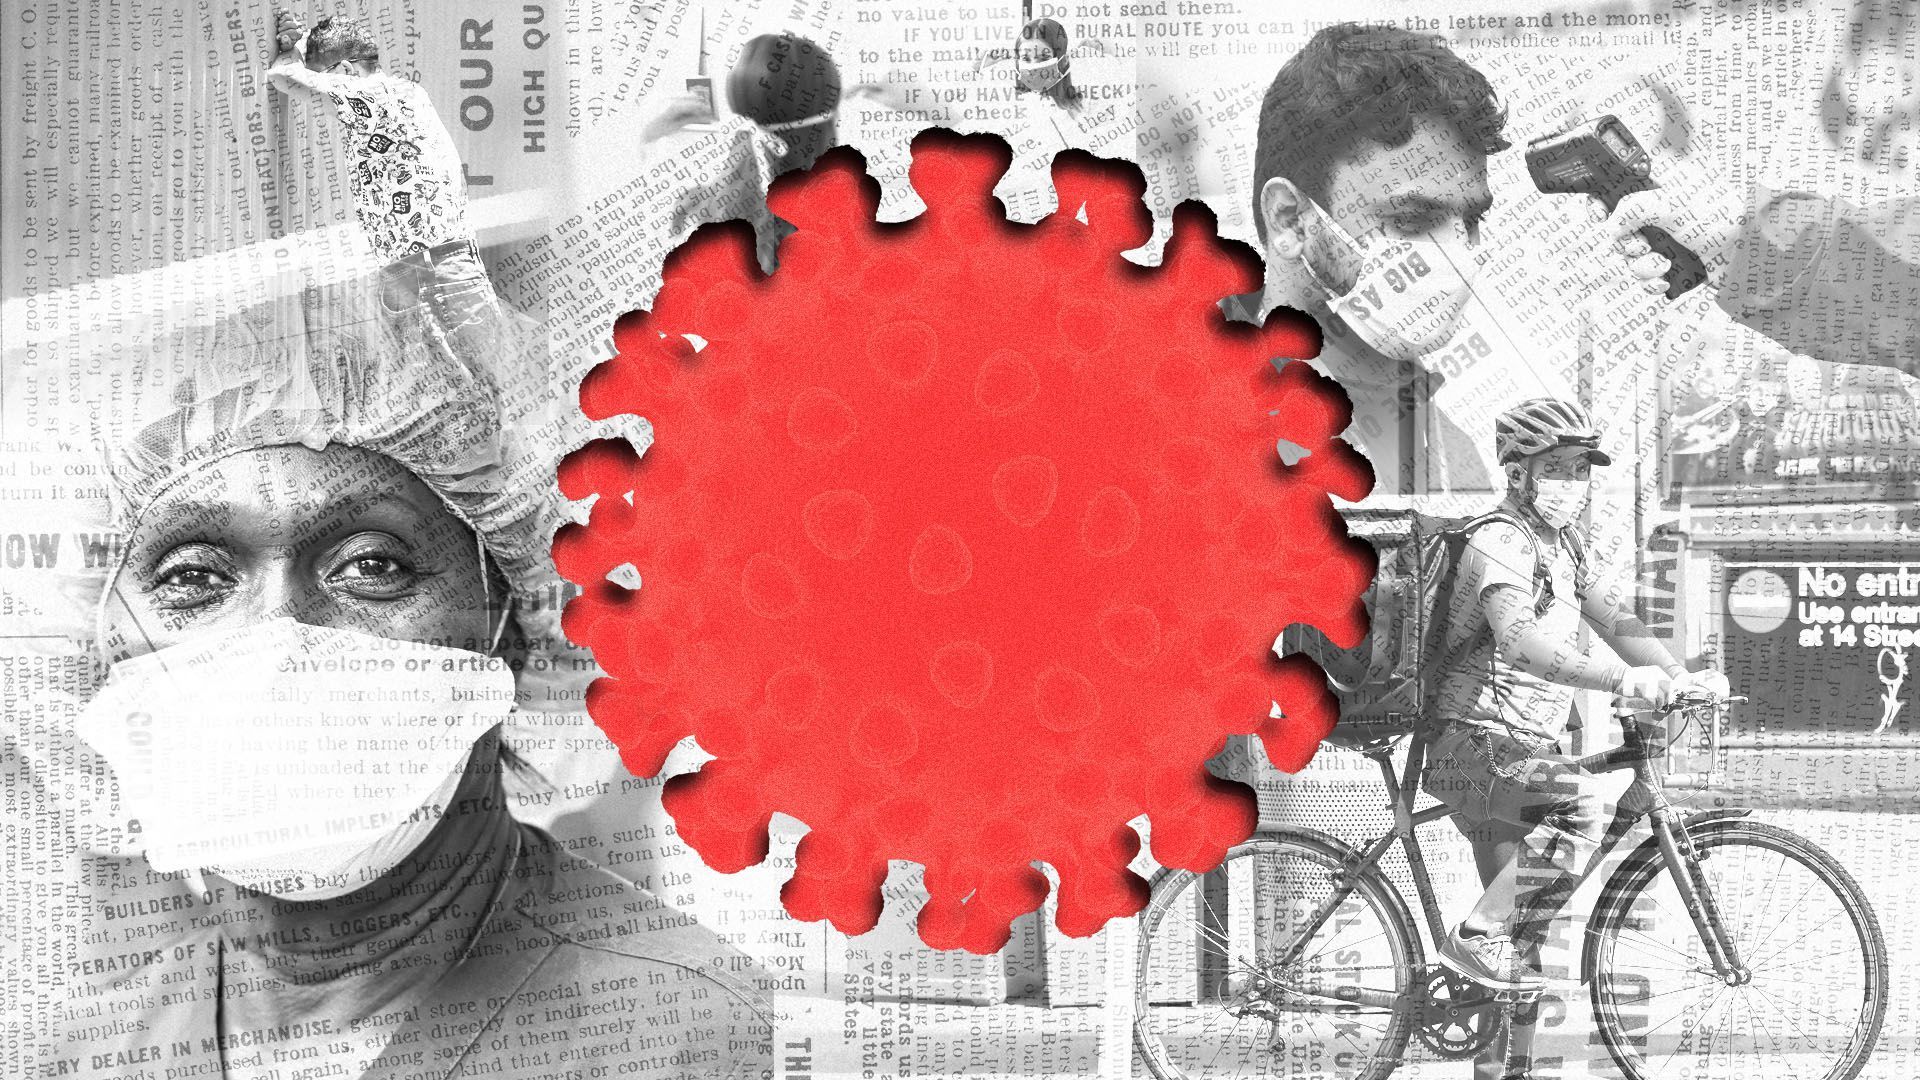 Photo collage of newspaper clippings with cutout of a red virus in the middle. Photos of healthcare and essential workers.